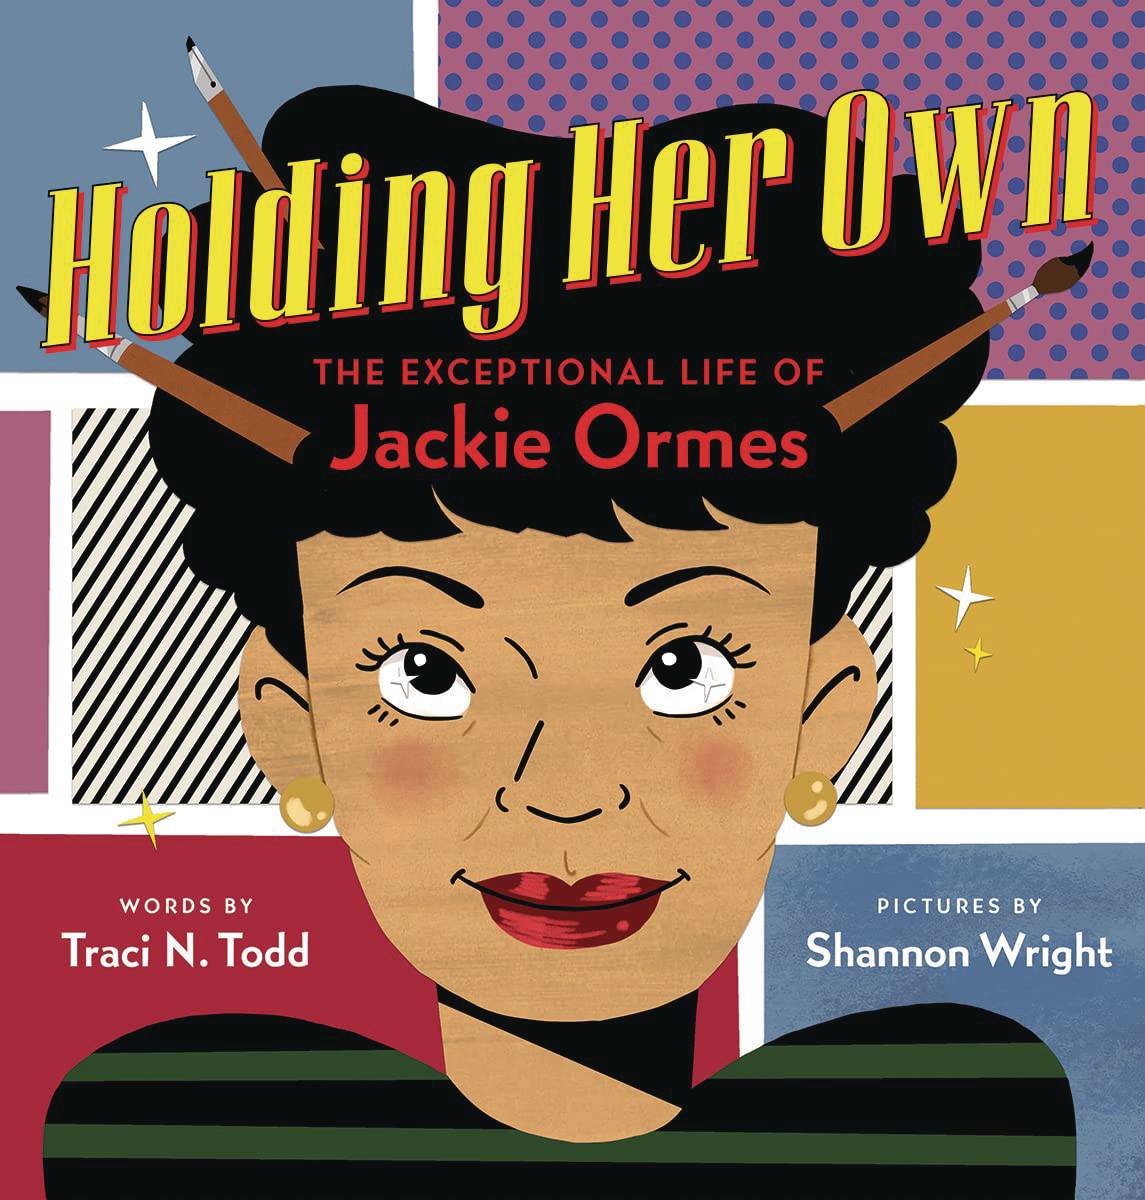 HOLDING HER OWN EXCEPTIONAL LIFE OF JACKIE ORMES HC